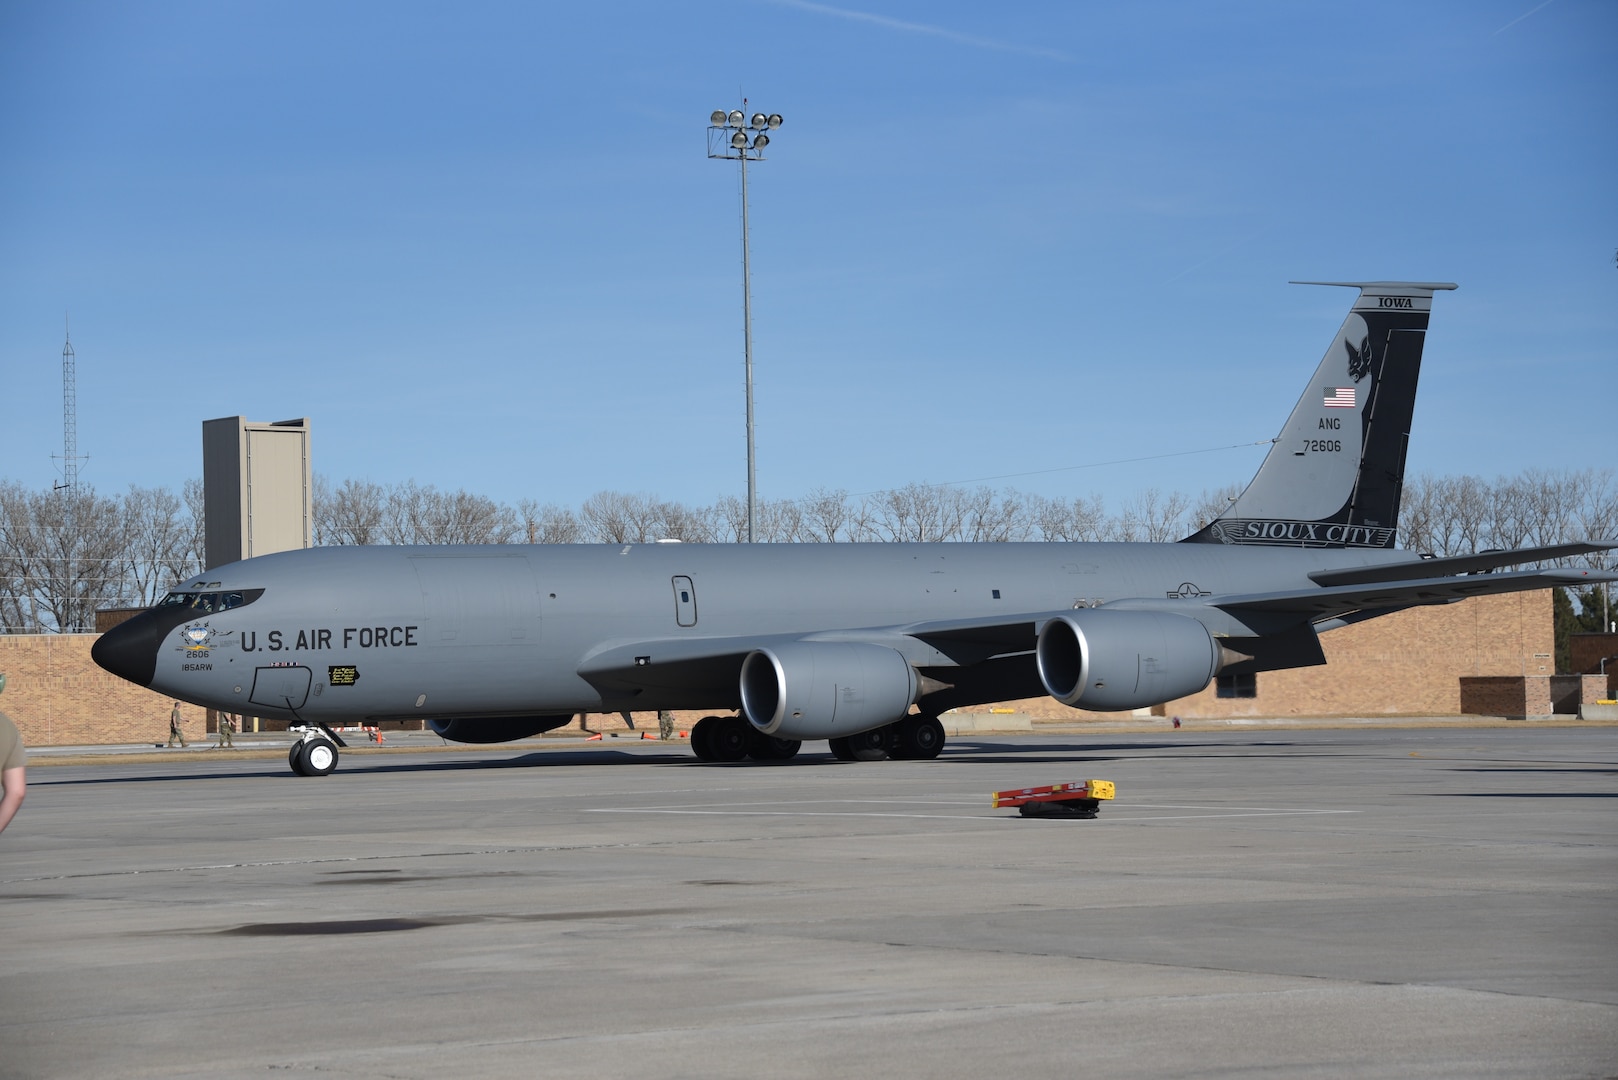 A U.S. Air Force KC-135 with 75th anniversary markings, including a large bat tail flash, tail number 57-2606 from the Iowa Air National Guard, taxis on the ramp at the 185th Air Refueling Wing in Sioux City, Iowa, March 1, 2022. The aircraft is due to be decommissioned and sent to the Aerospace Maintenance and Regeneration Group at Davis-Monthan Air Force Base.